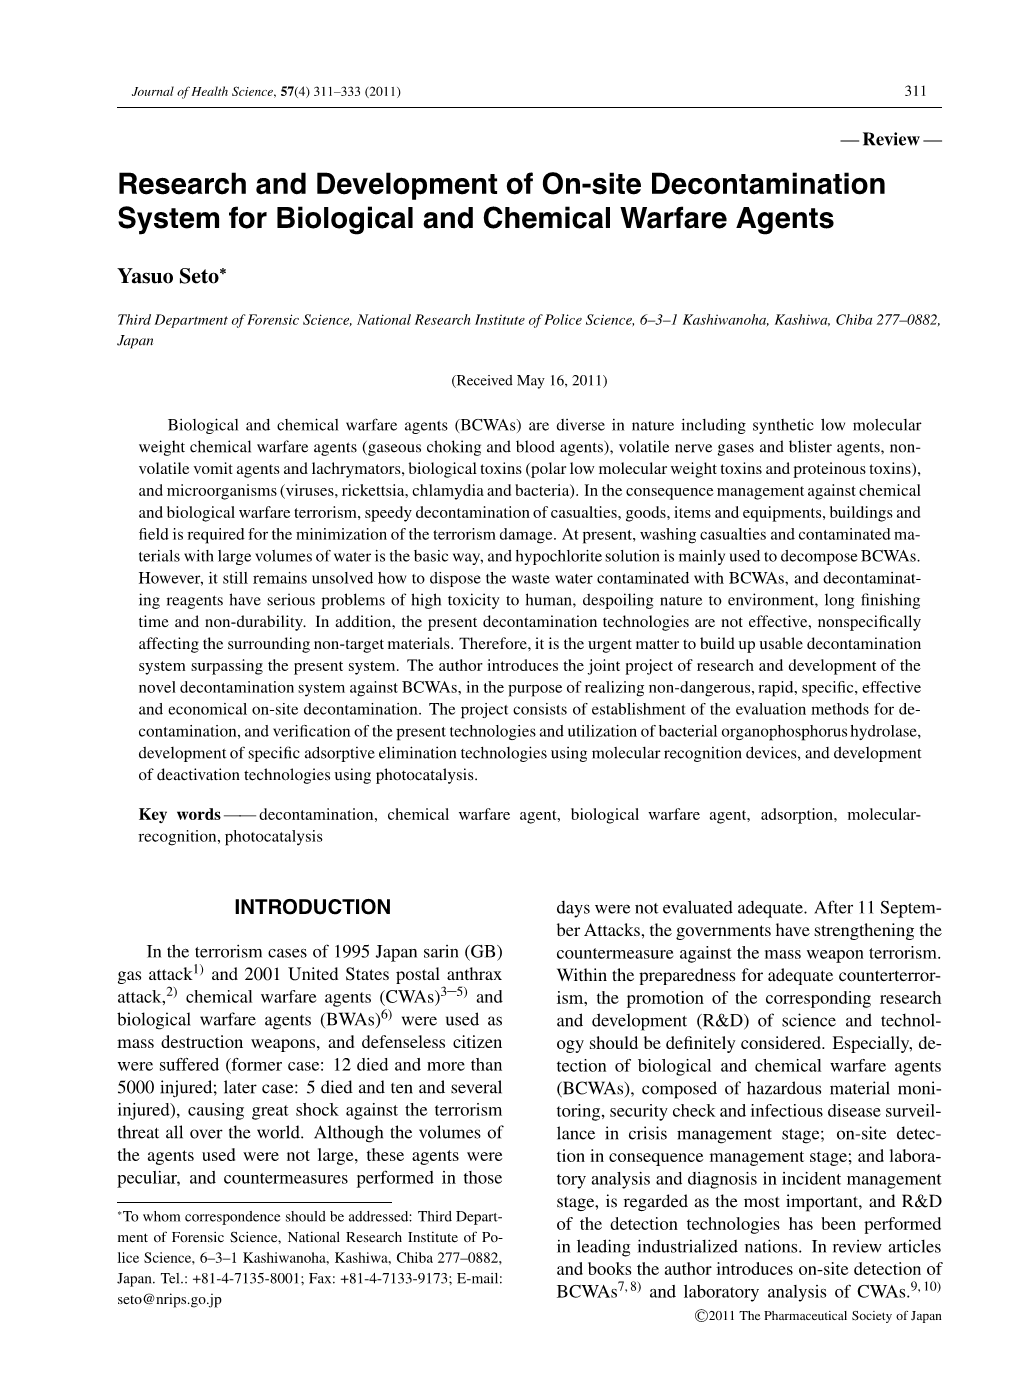 Research and Development of On-Site Decontamination System for Biological and Chemical Warfare Agents